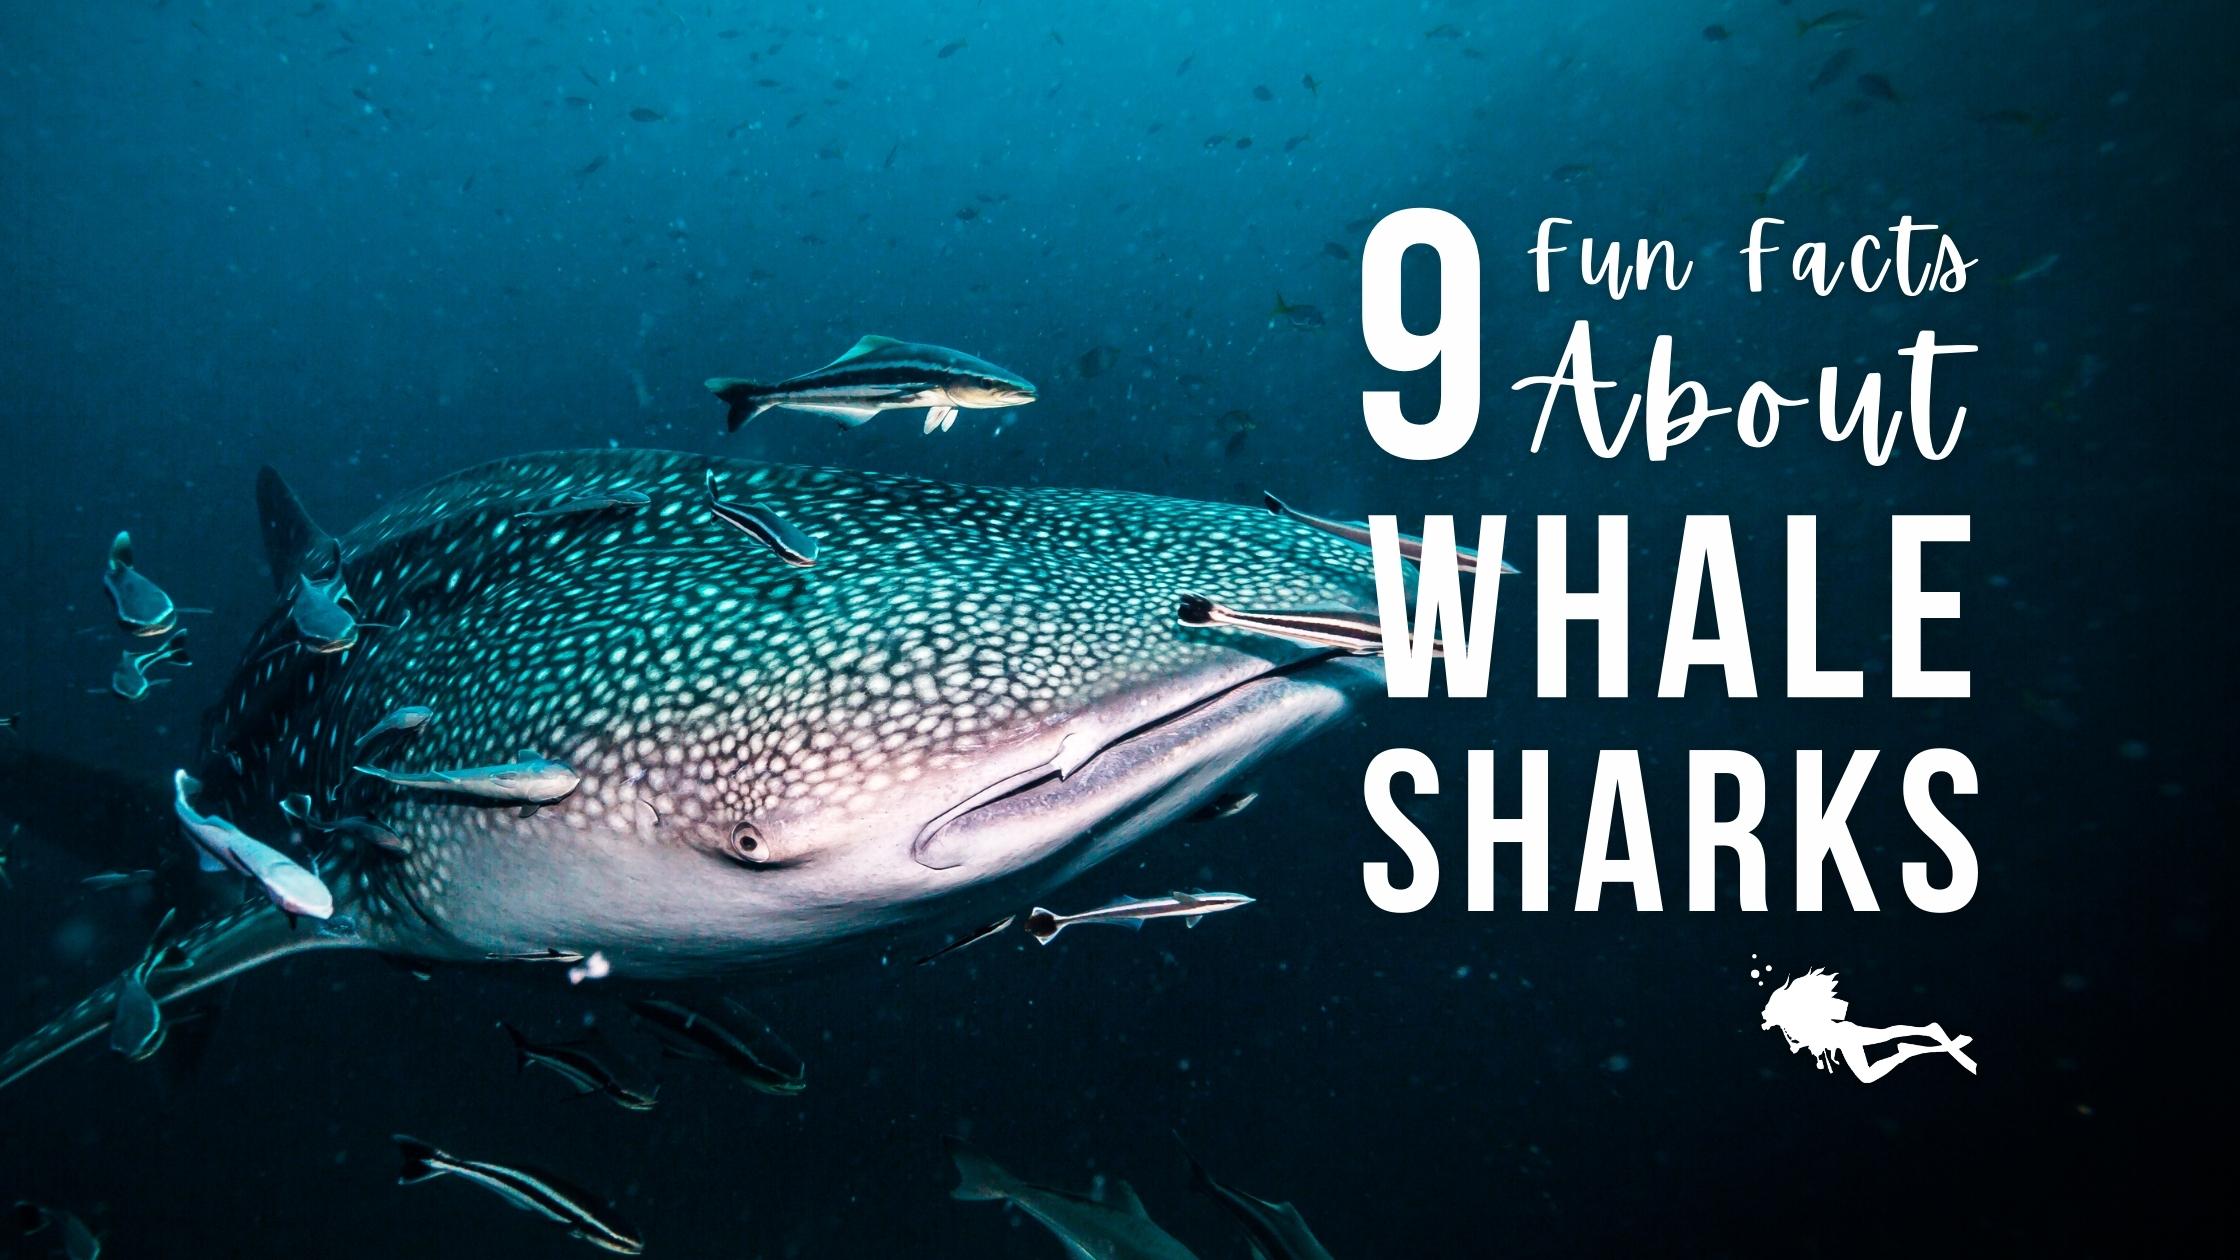 images of whale sharks